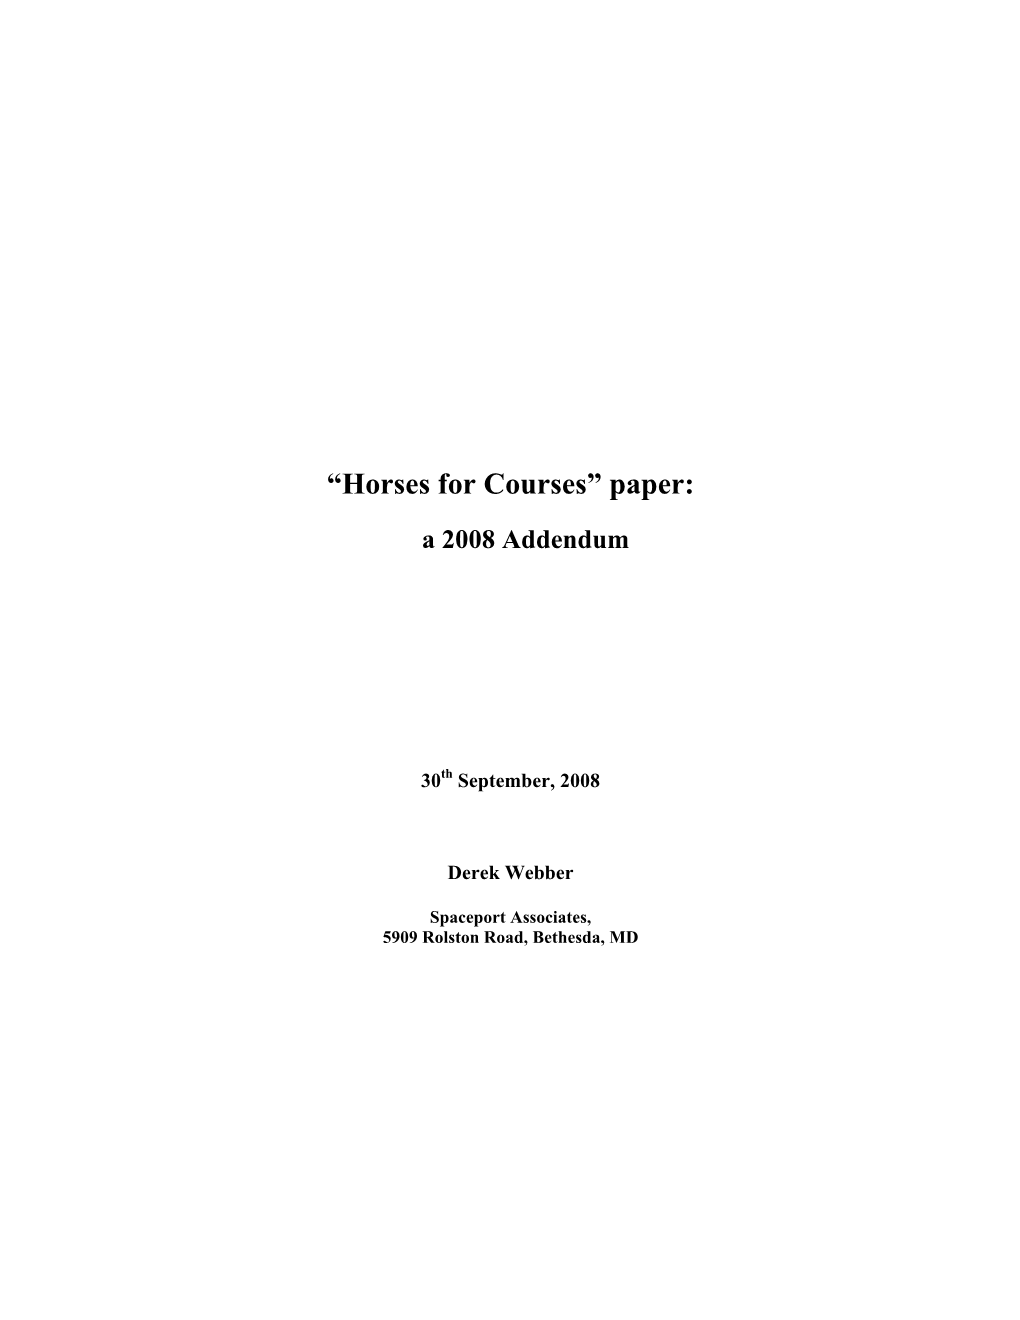 “Horses for Courses” Paper